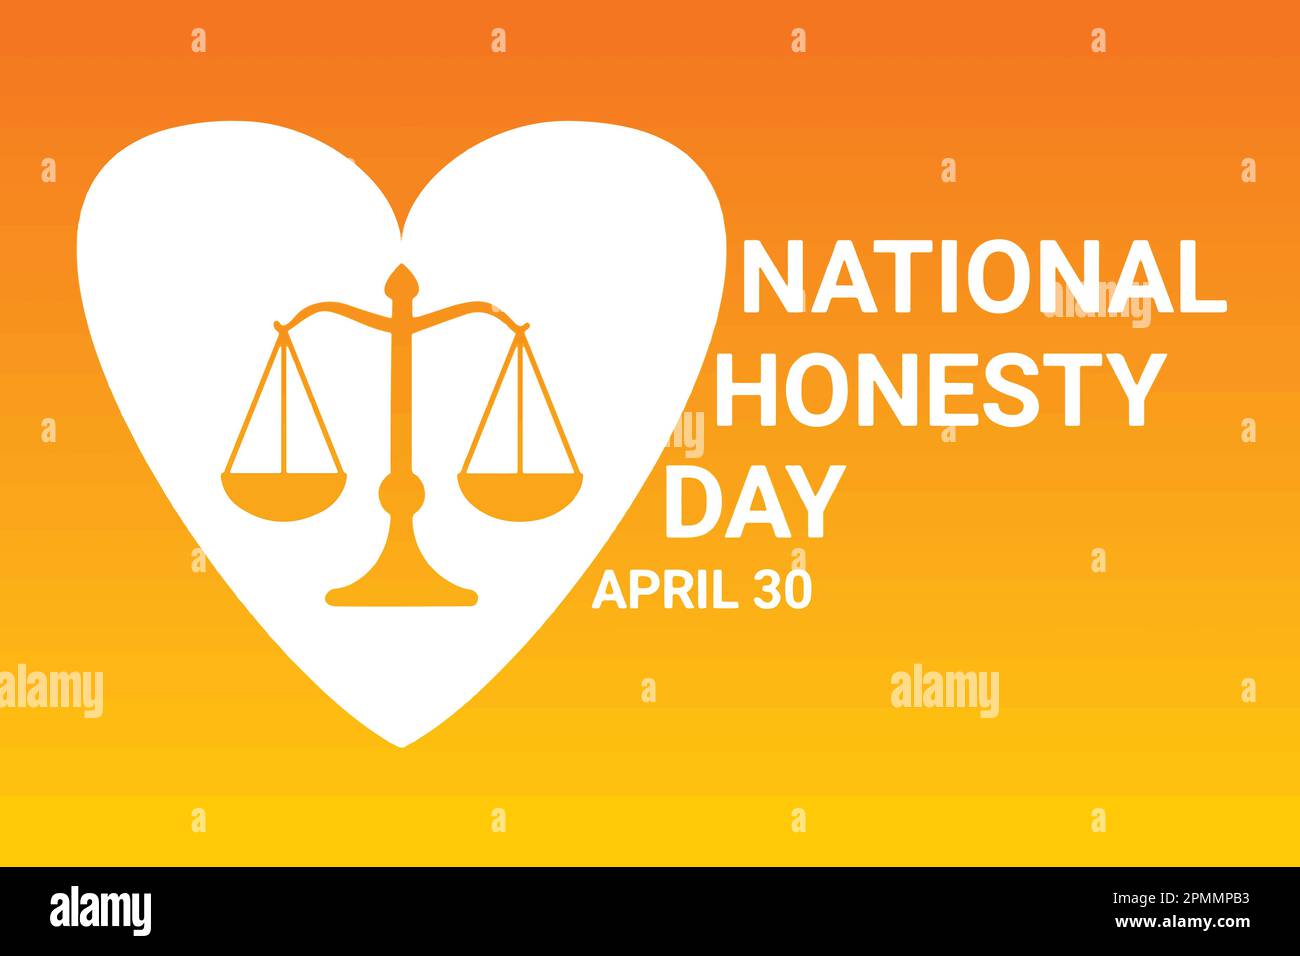 National Honesty Day. April 30. Holiday concept. Template for background, banner, card, poster with text inscription. Stock Vector